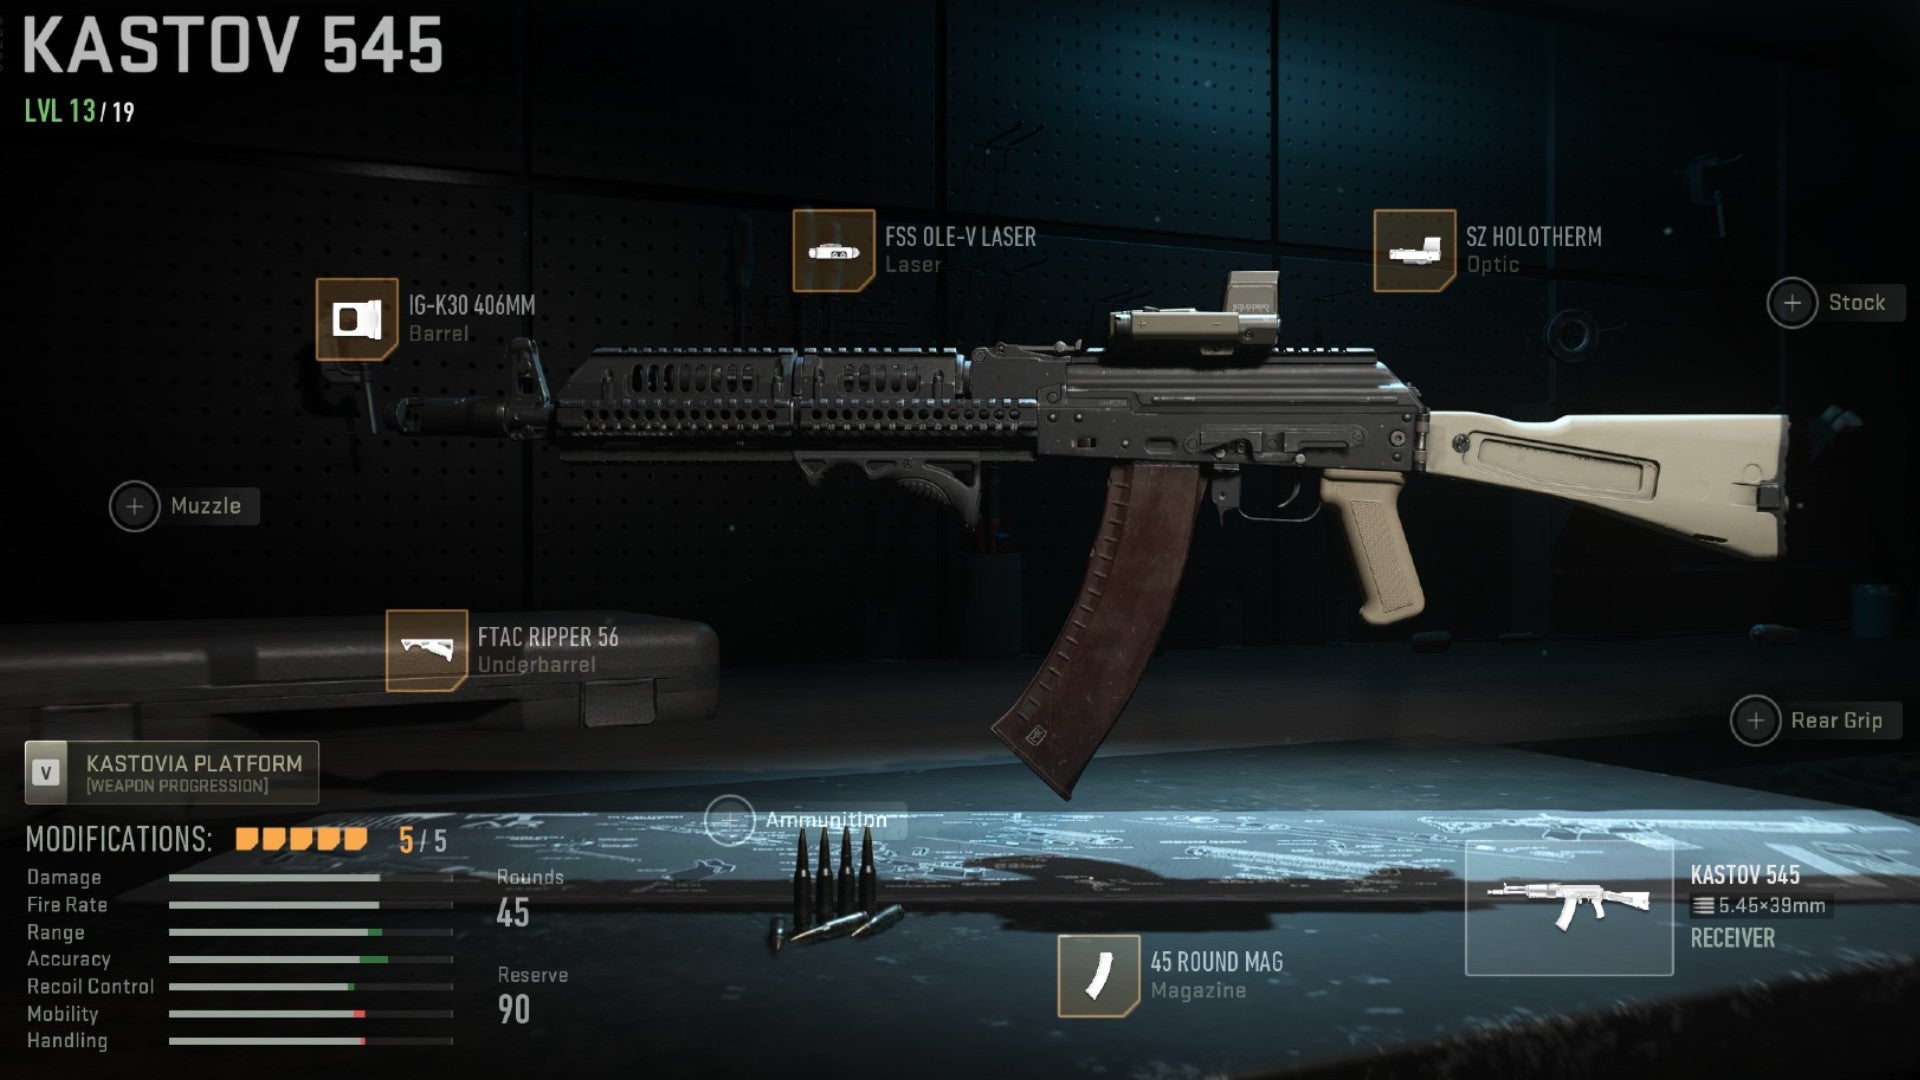 Warzone 2 screenshot showing the Kastov 545 with the IG-K30 406mm, FTAC Ripper 56, FSS OLE-V Laser, 45 Round Mag, and SZ Holotherm attached.